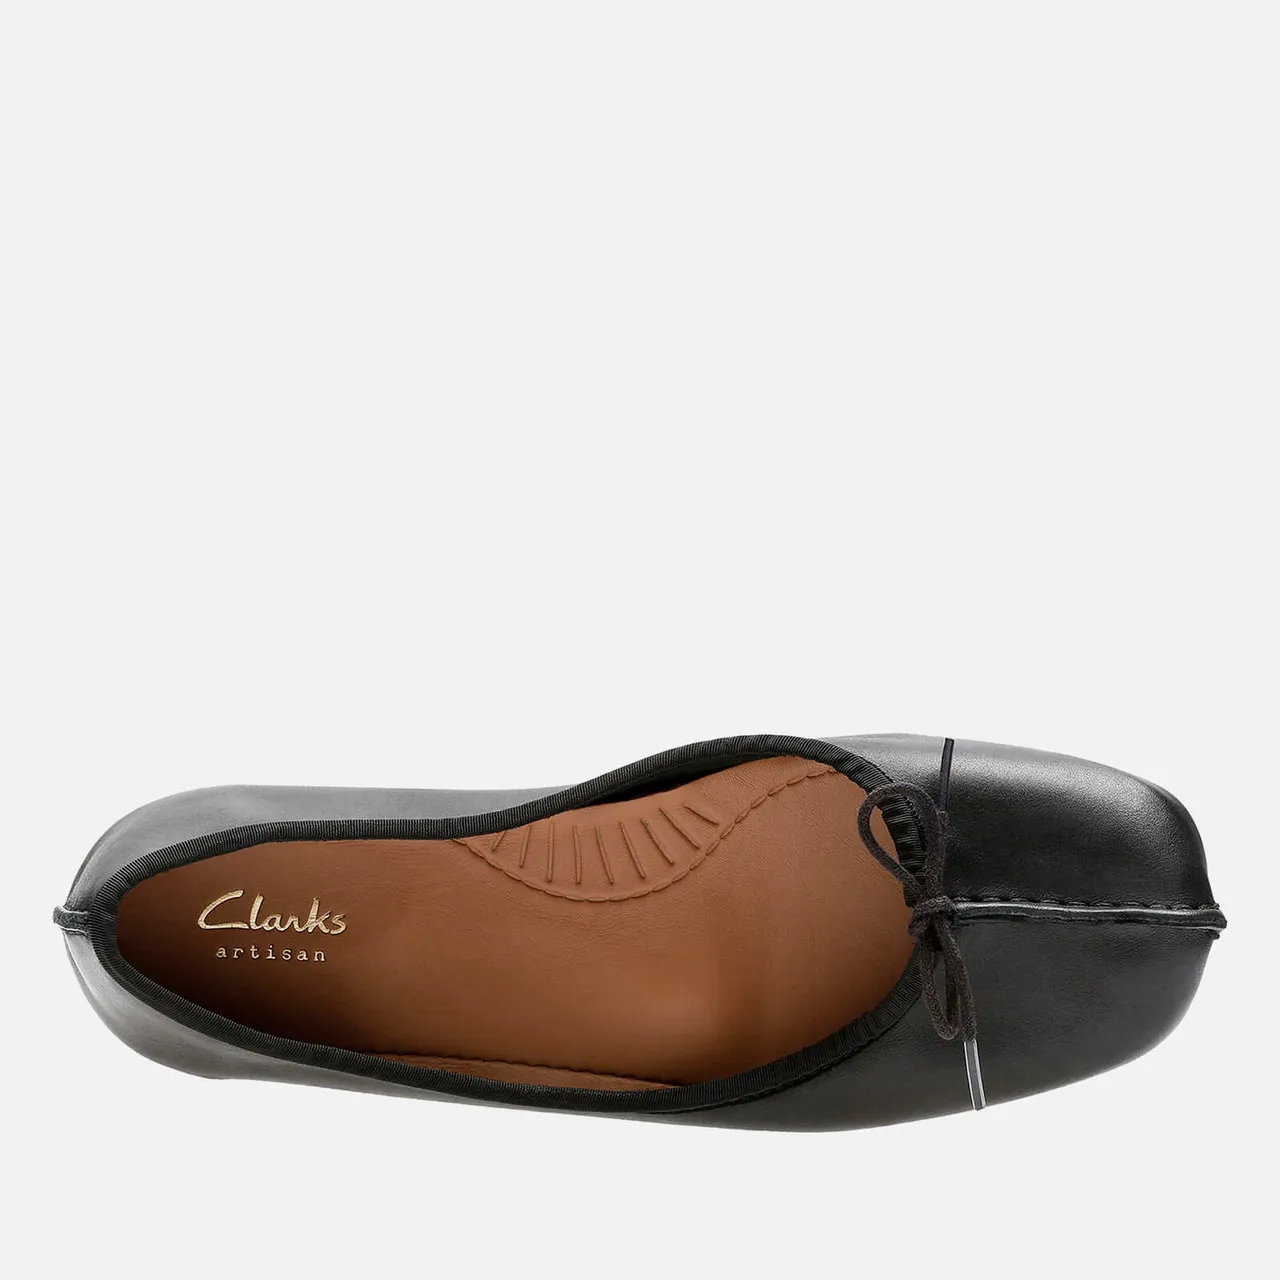 Clarks Women's Freckle Ice Leather Ballet Flats